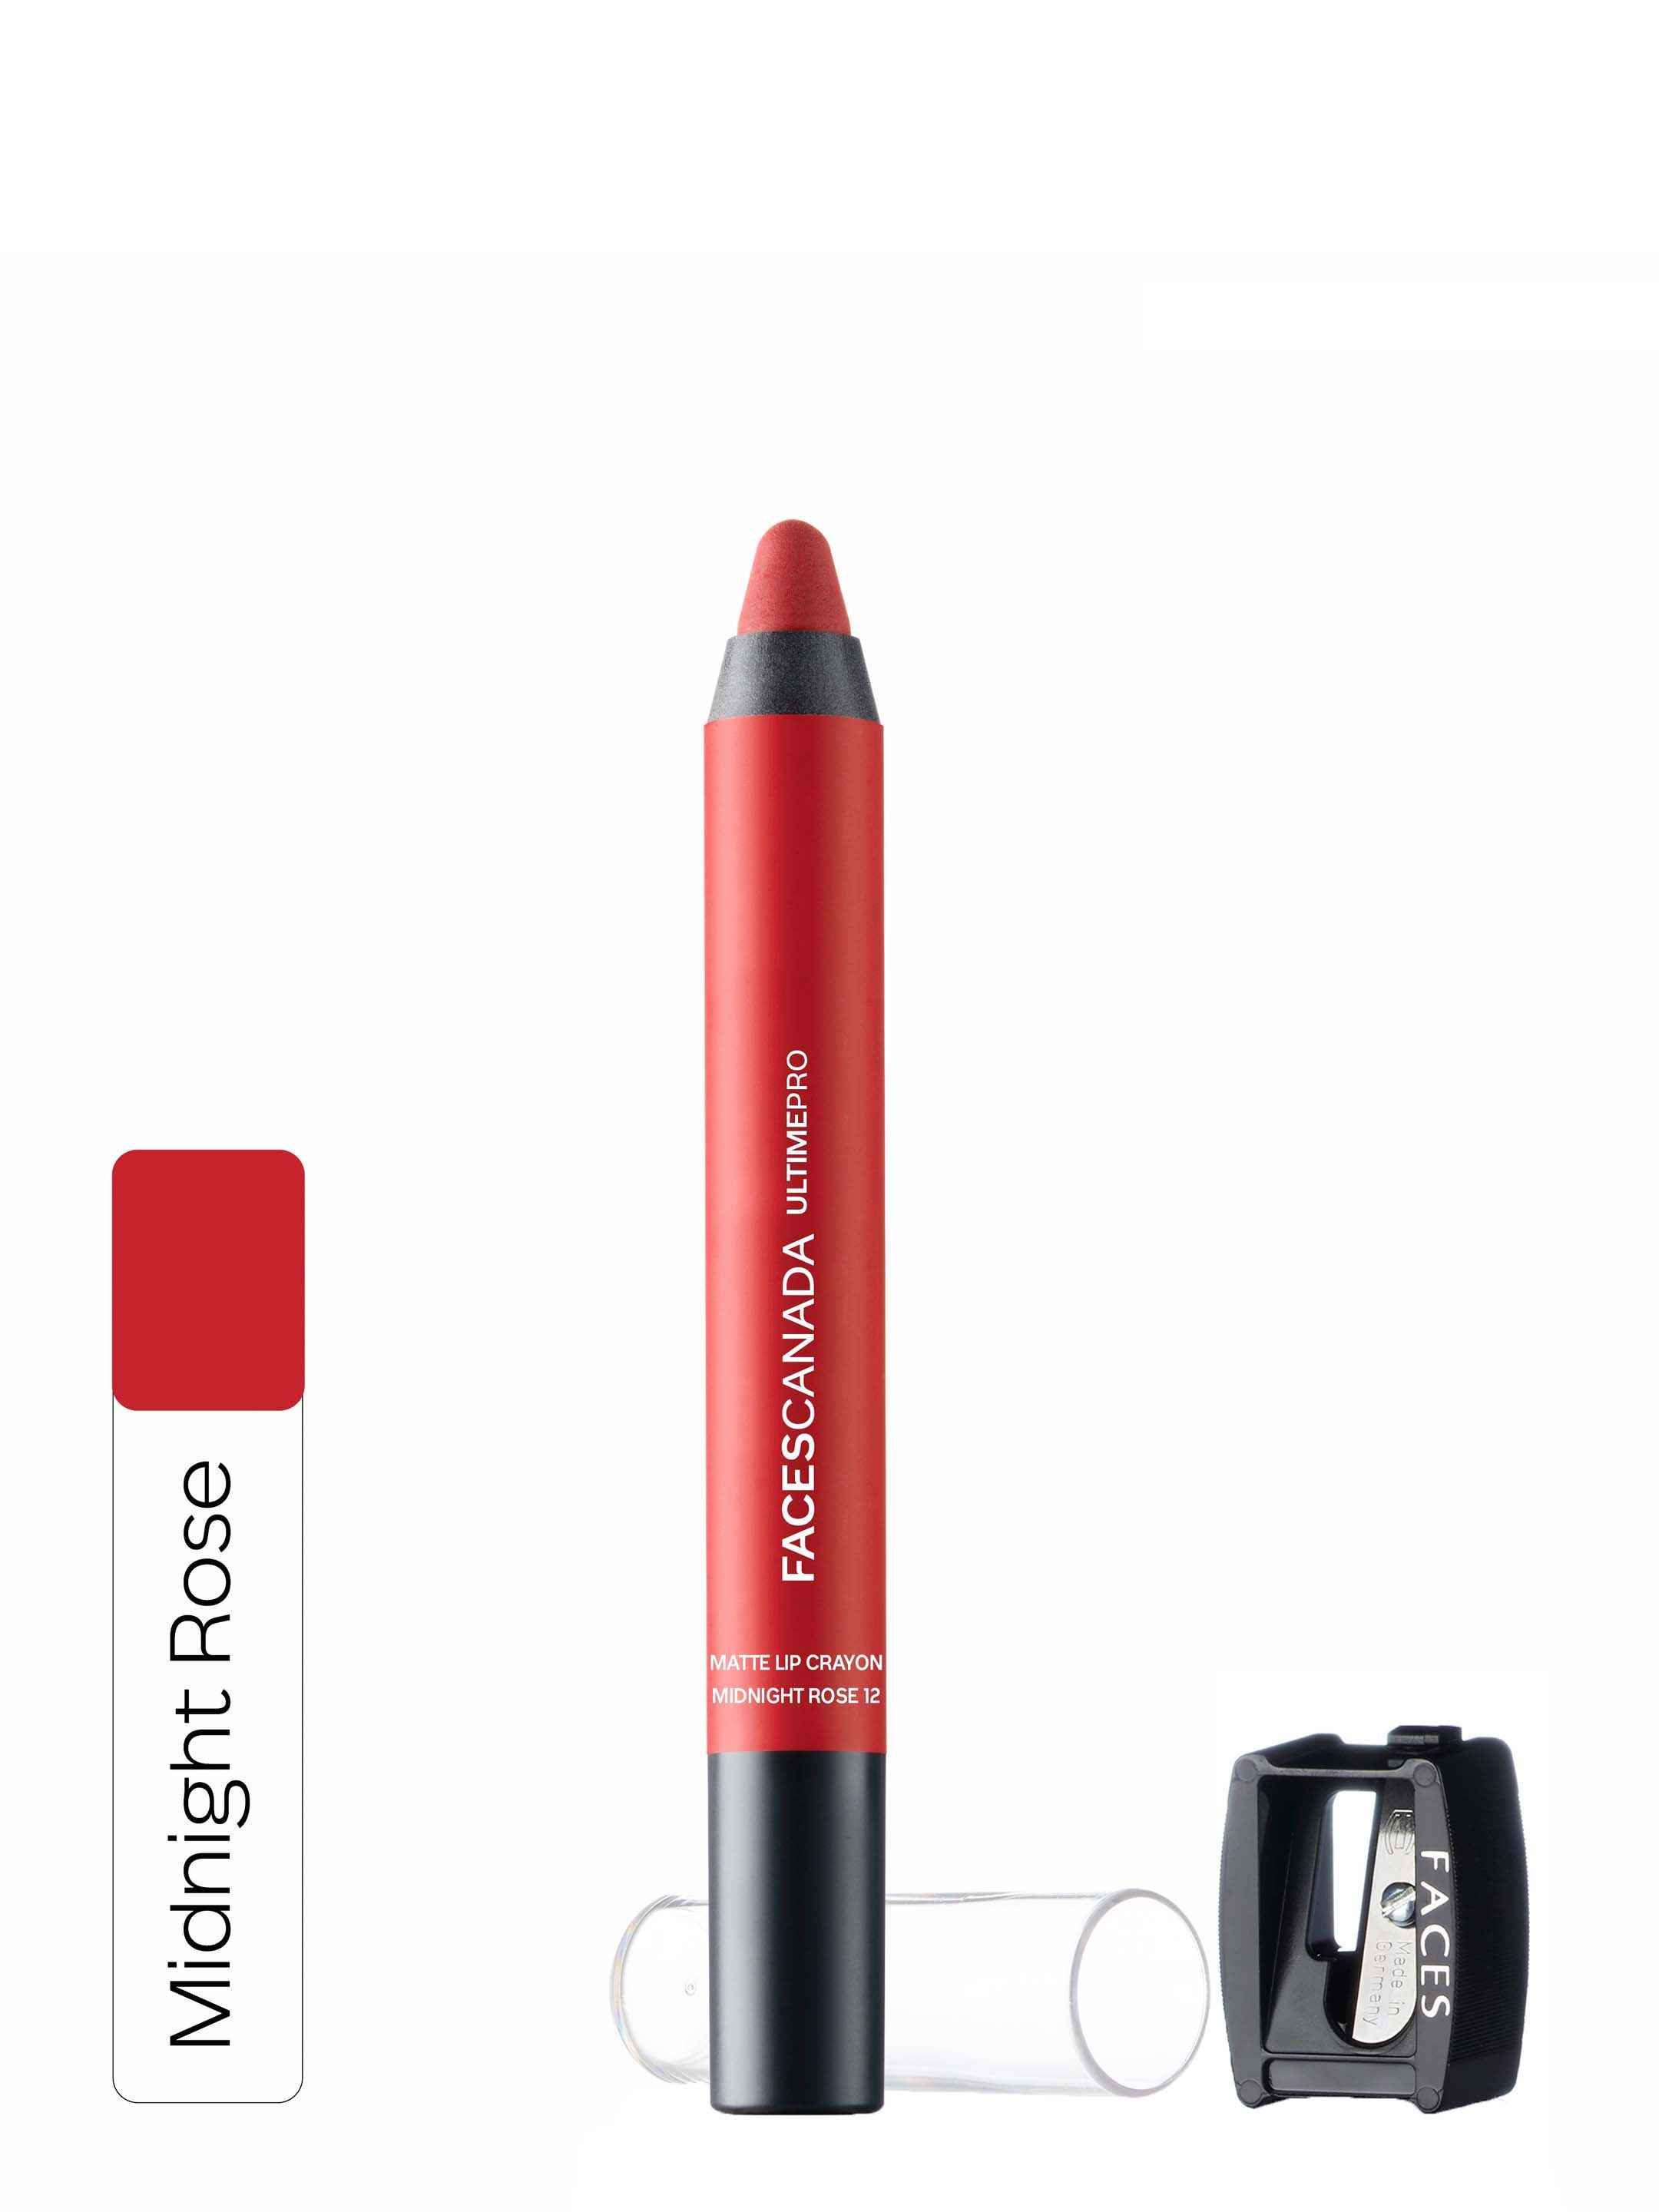 FACES CANADA Ultime Pro MidnightRose Matte Lip Crayon 12 Price in India